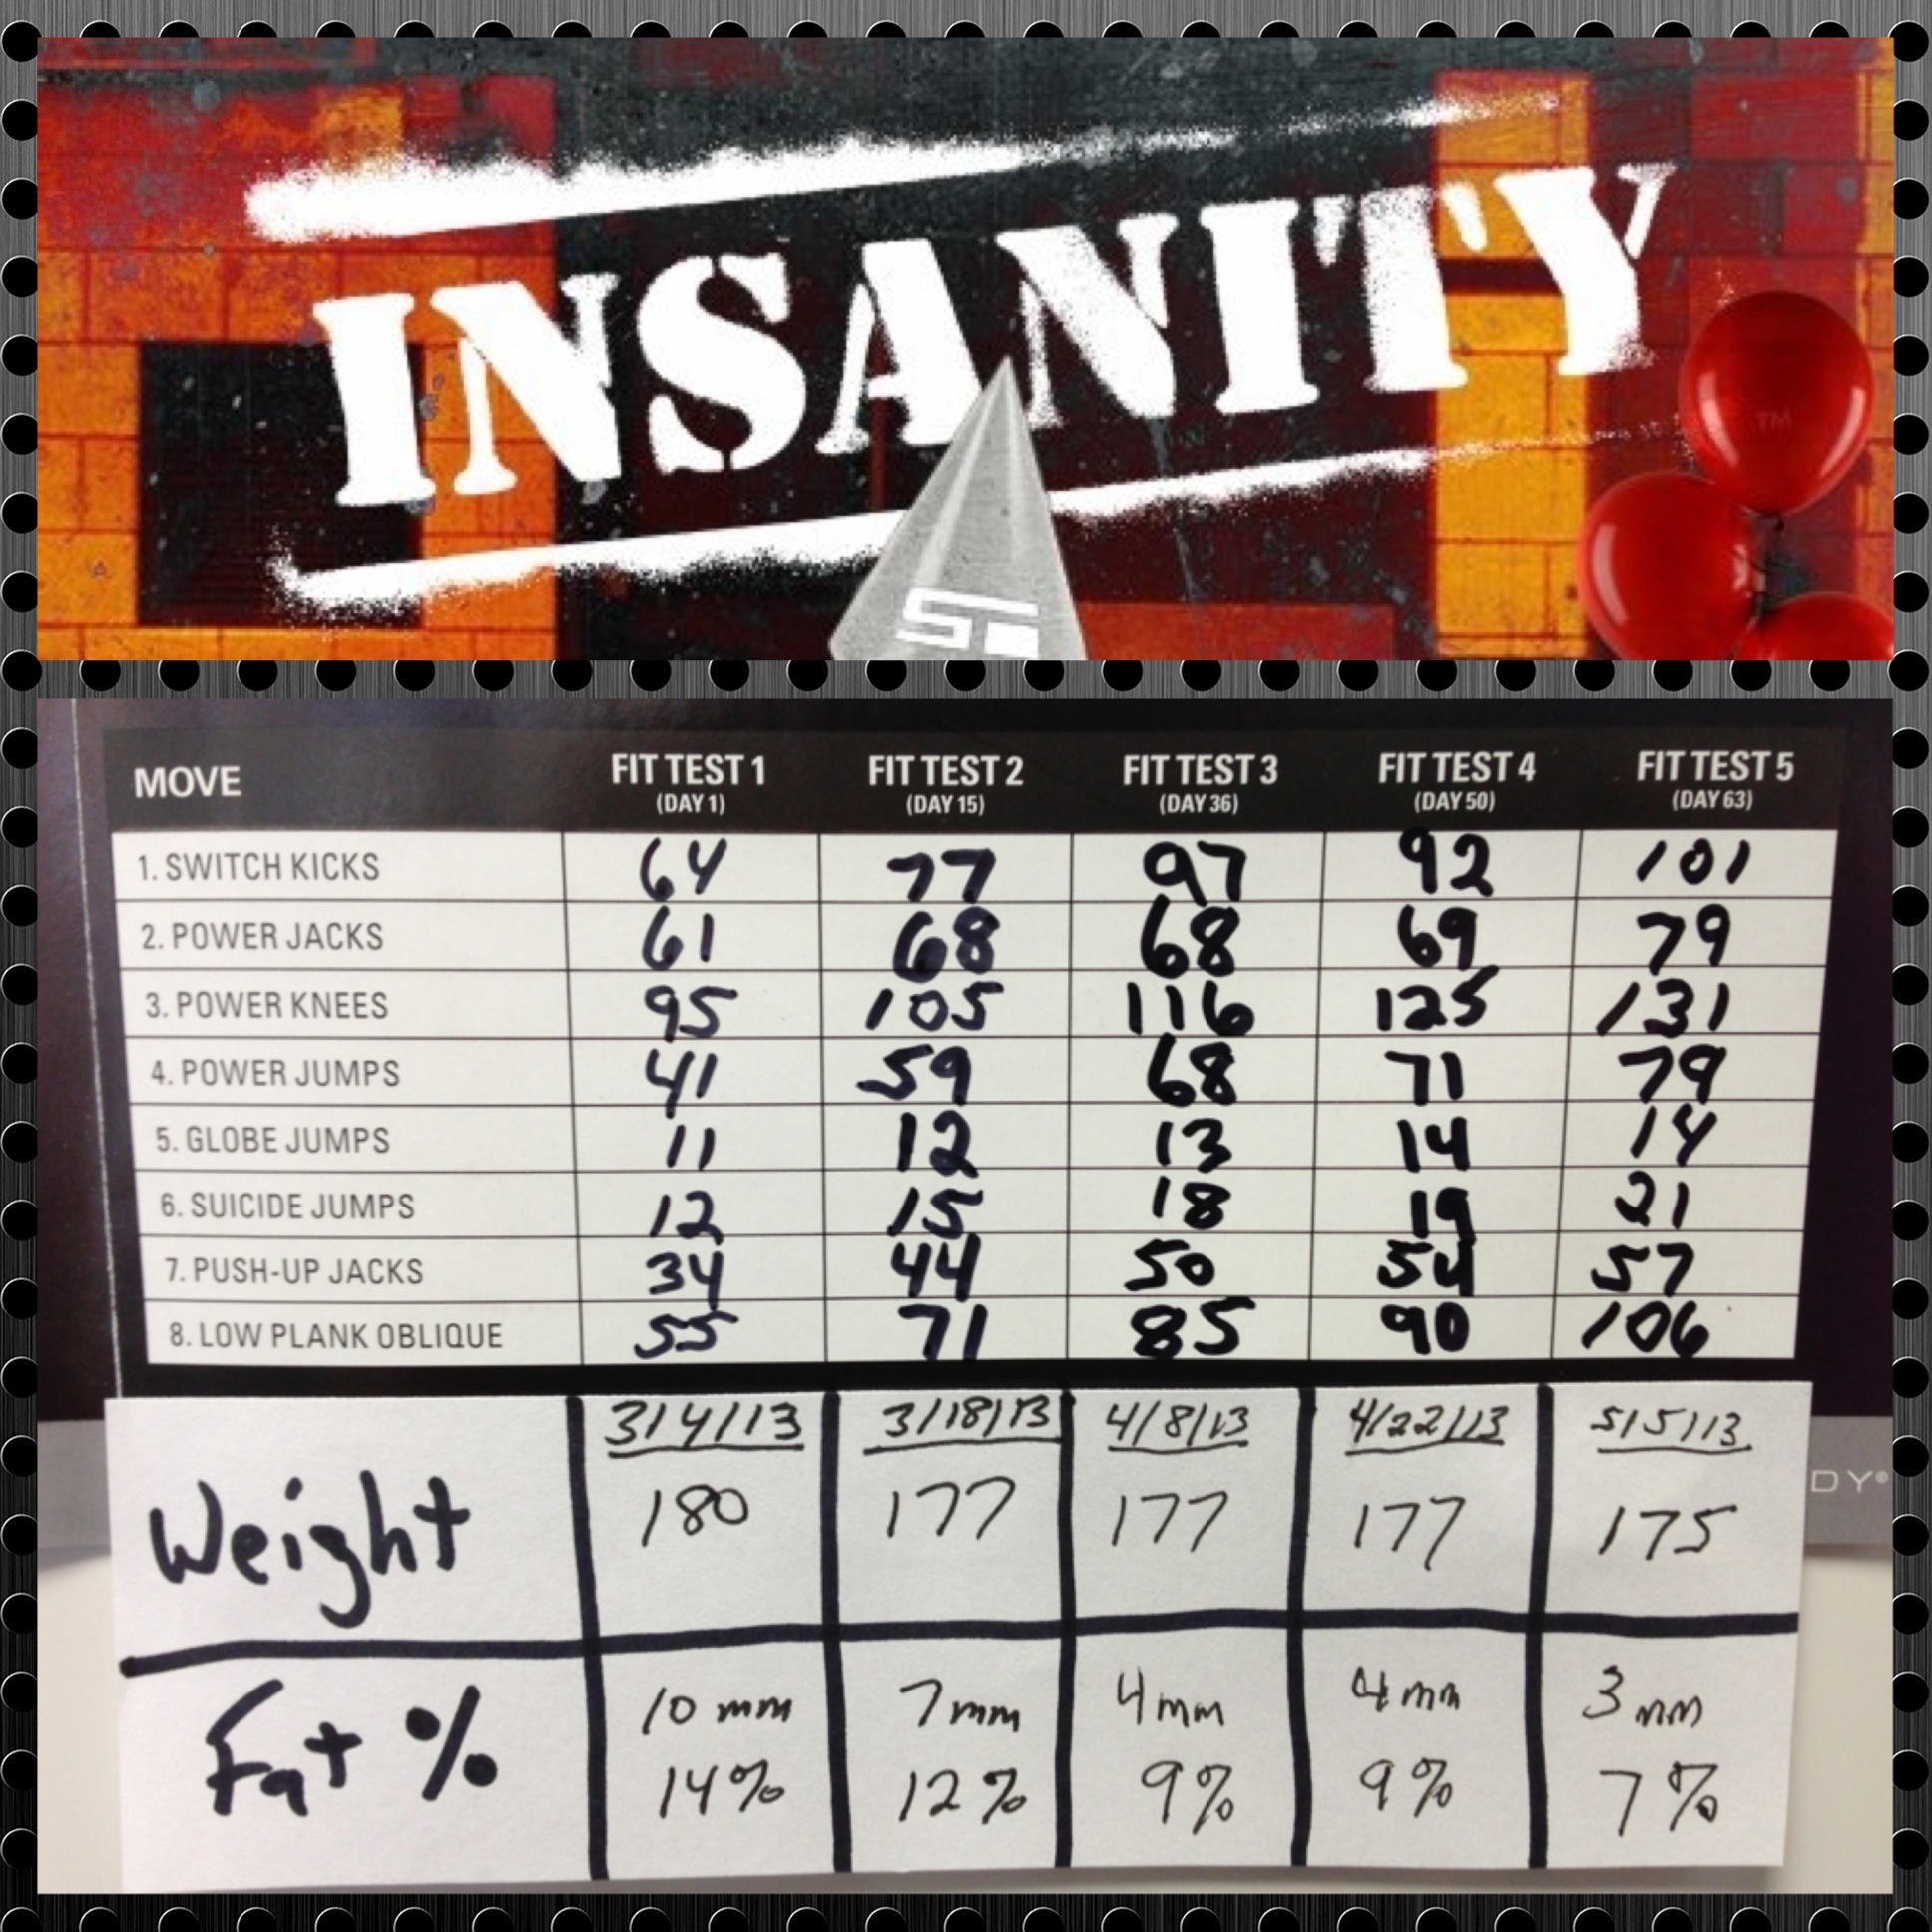 shaun t insanity workout video free download